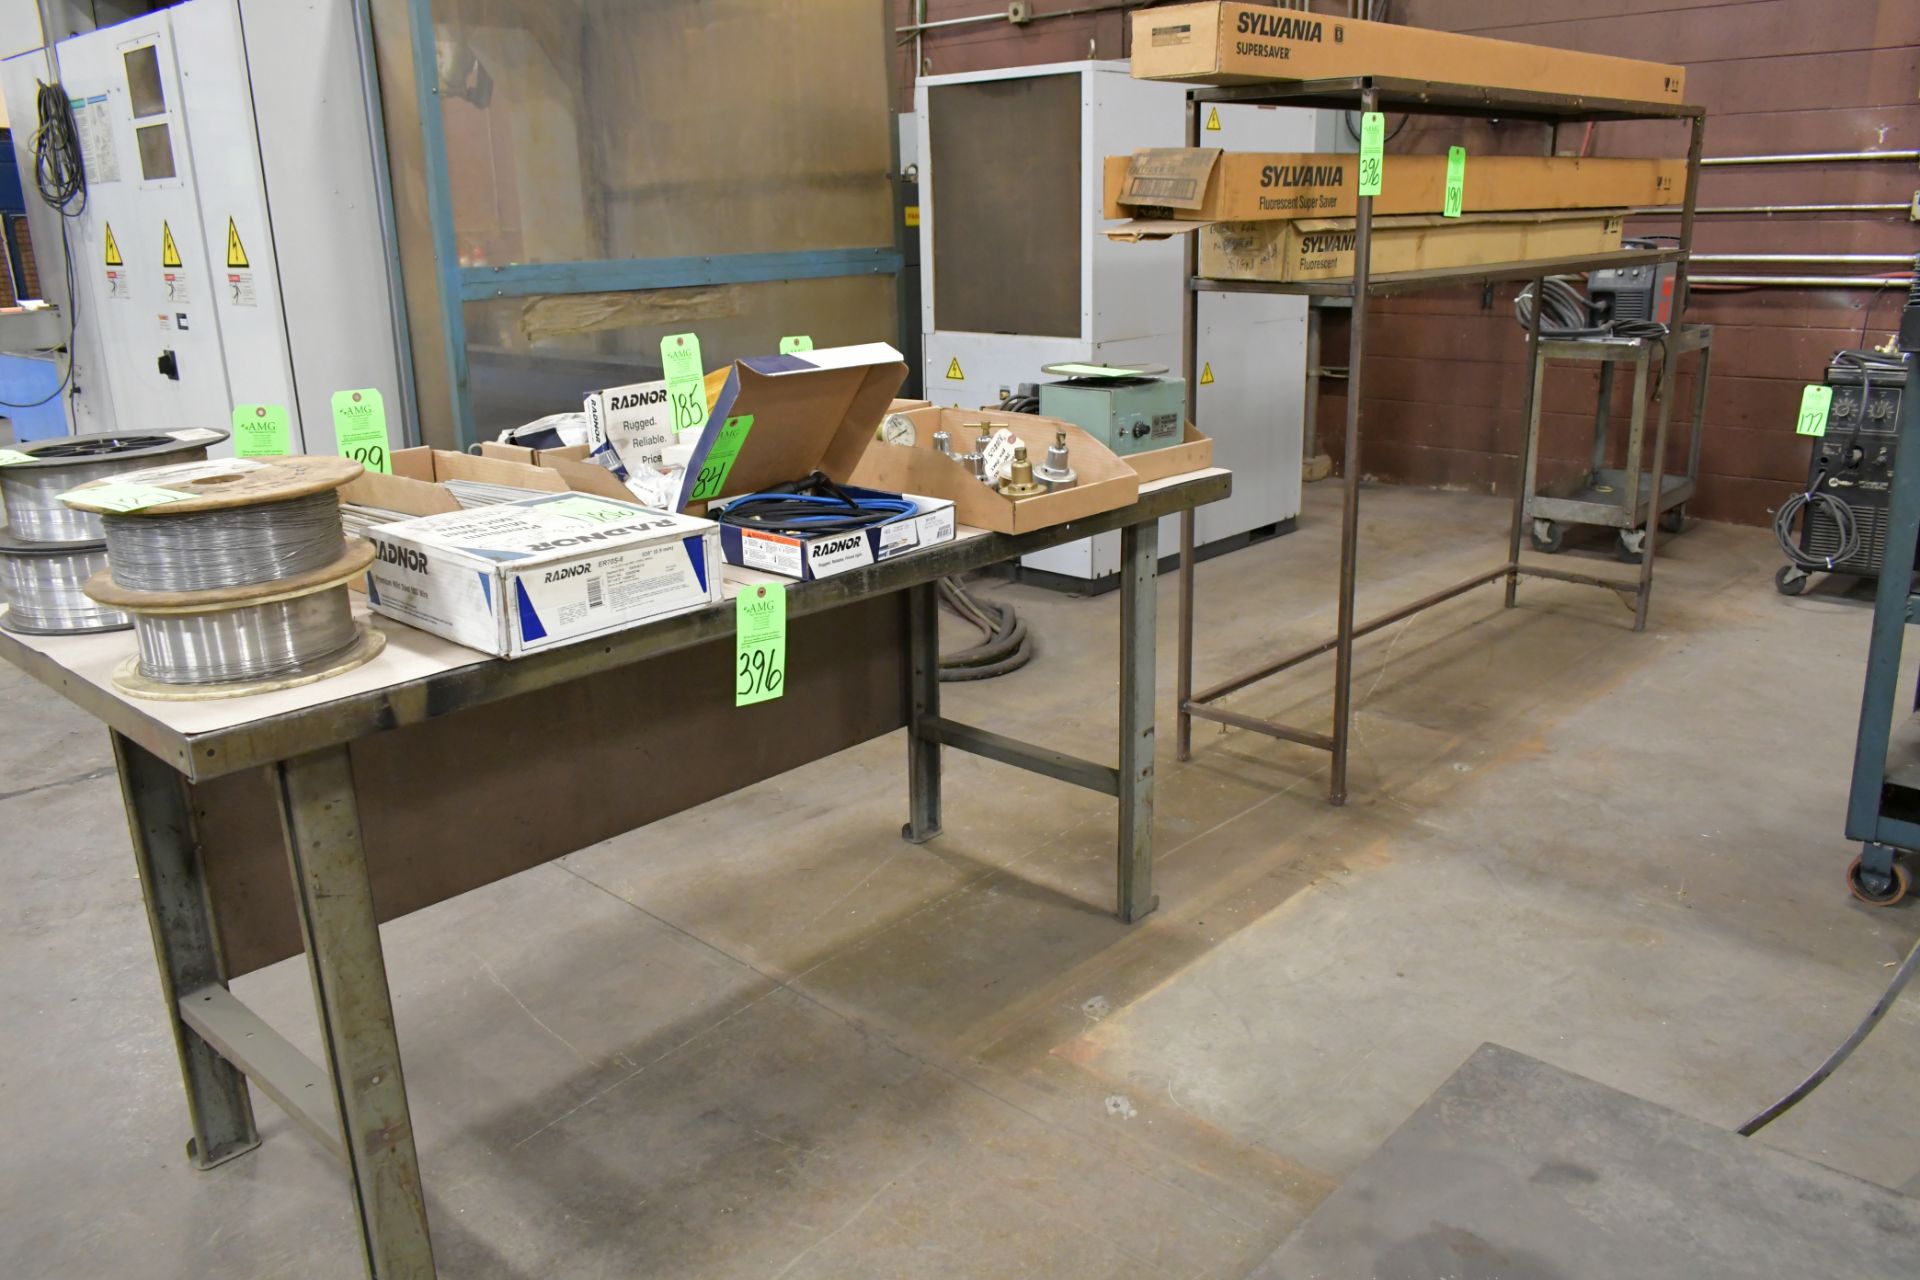 Lot-(1) Work Bench and (1) Section Light Duty Shelving, (Contents Not Included), (Not to Be